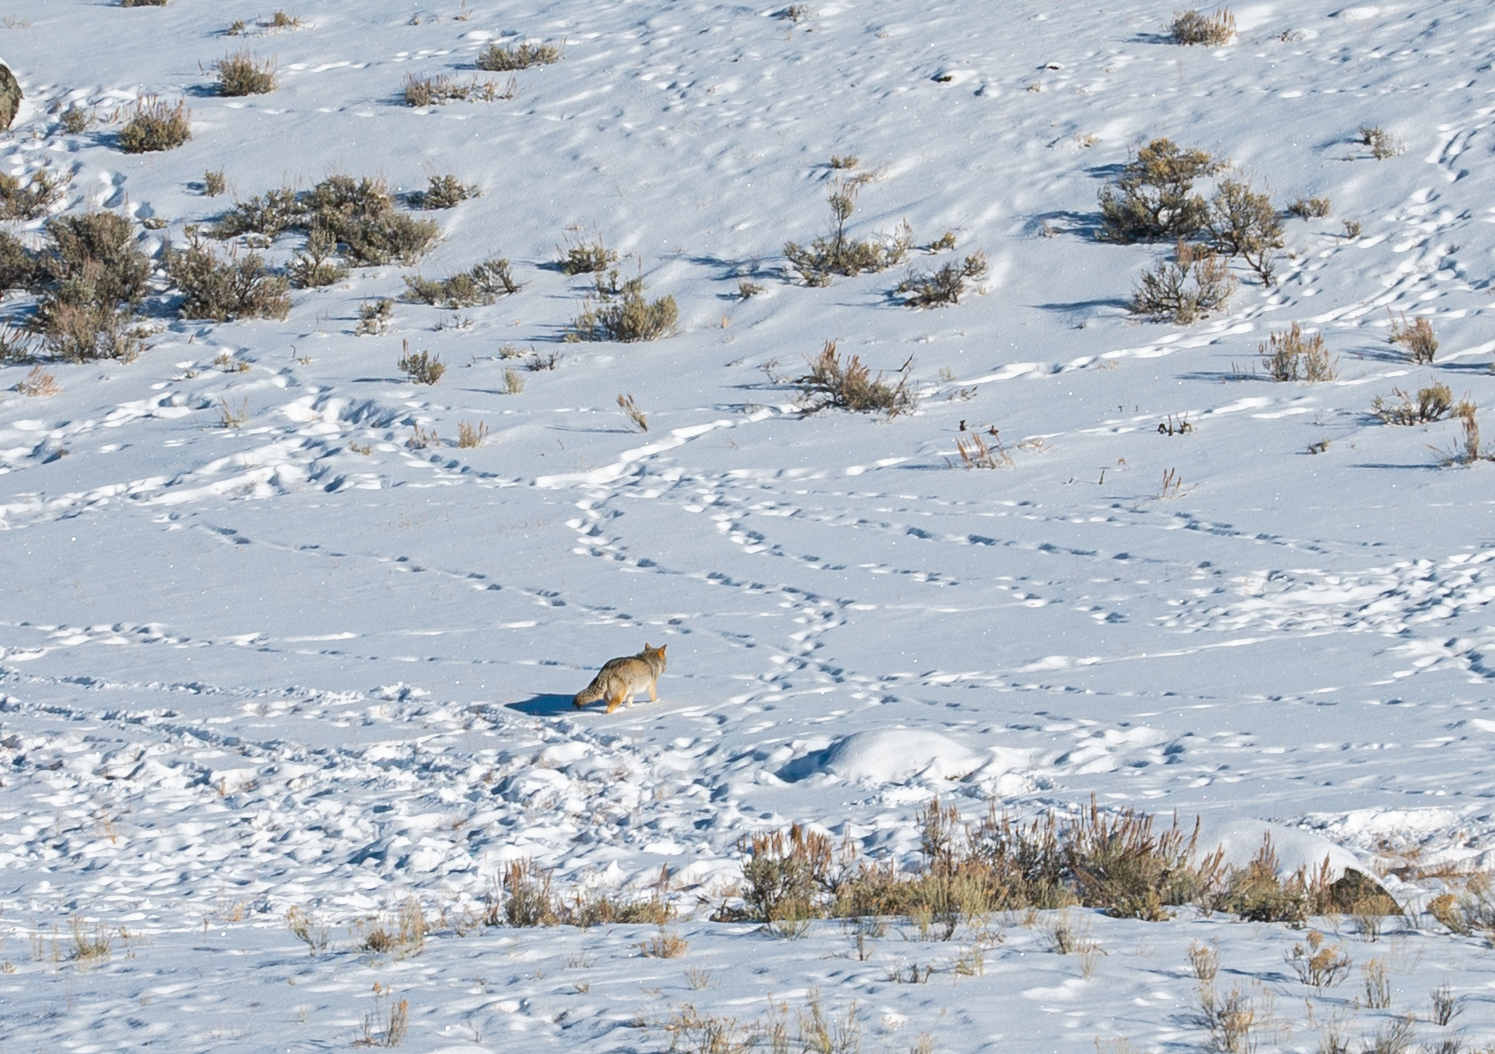 A coyote wandering across the snow in Yellowstone